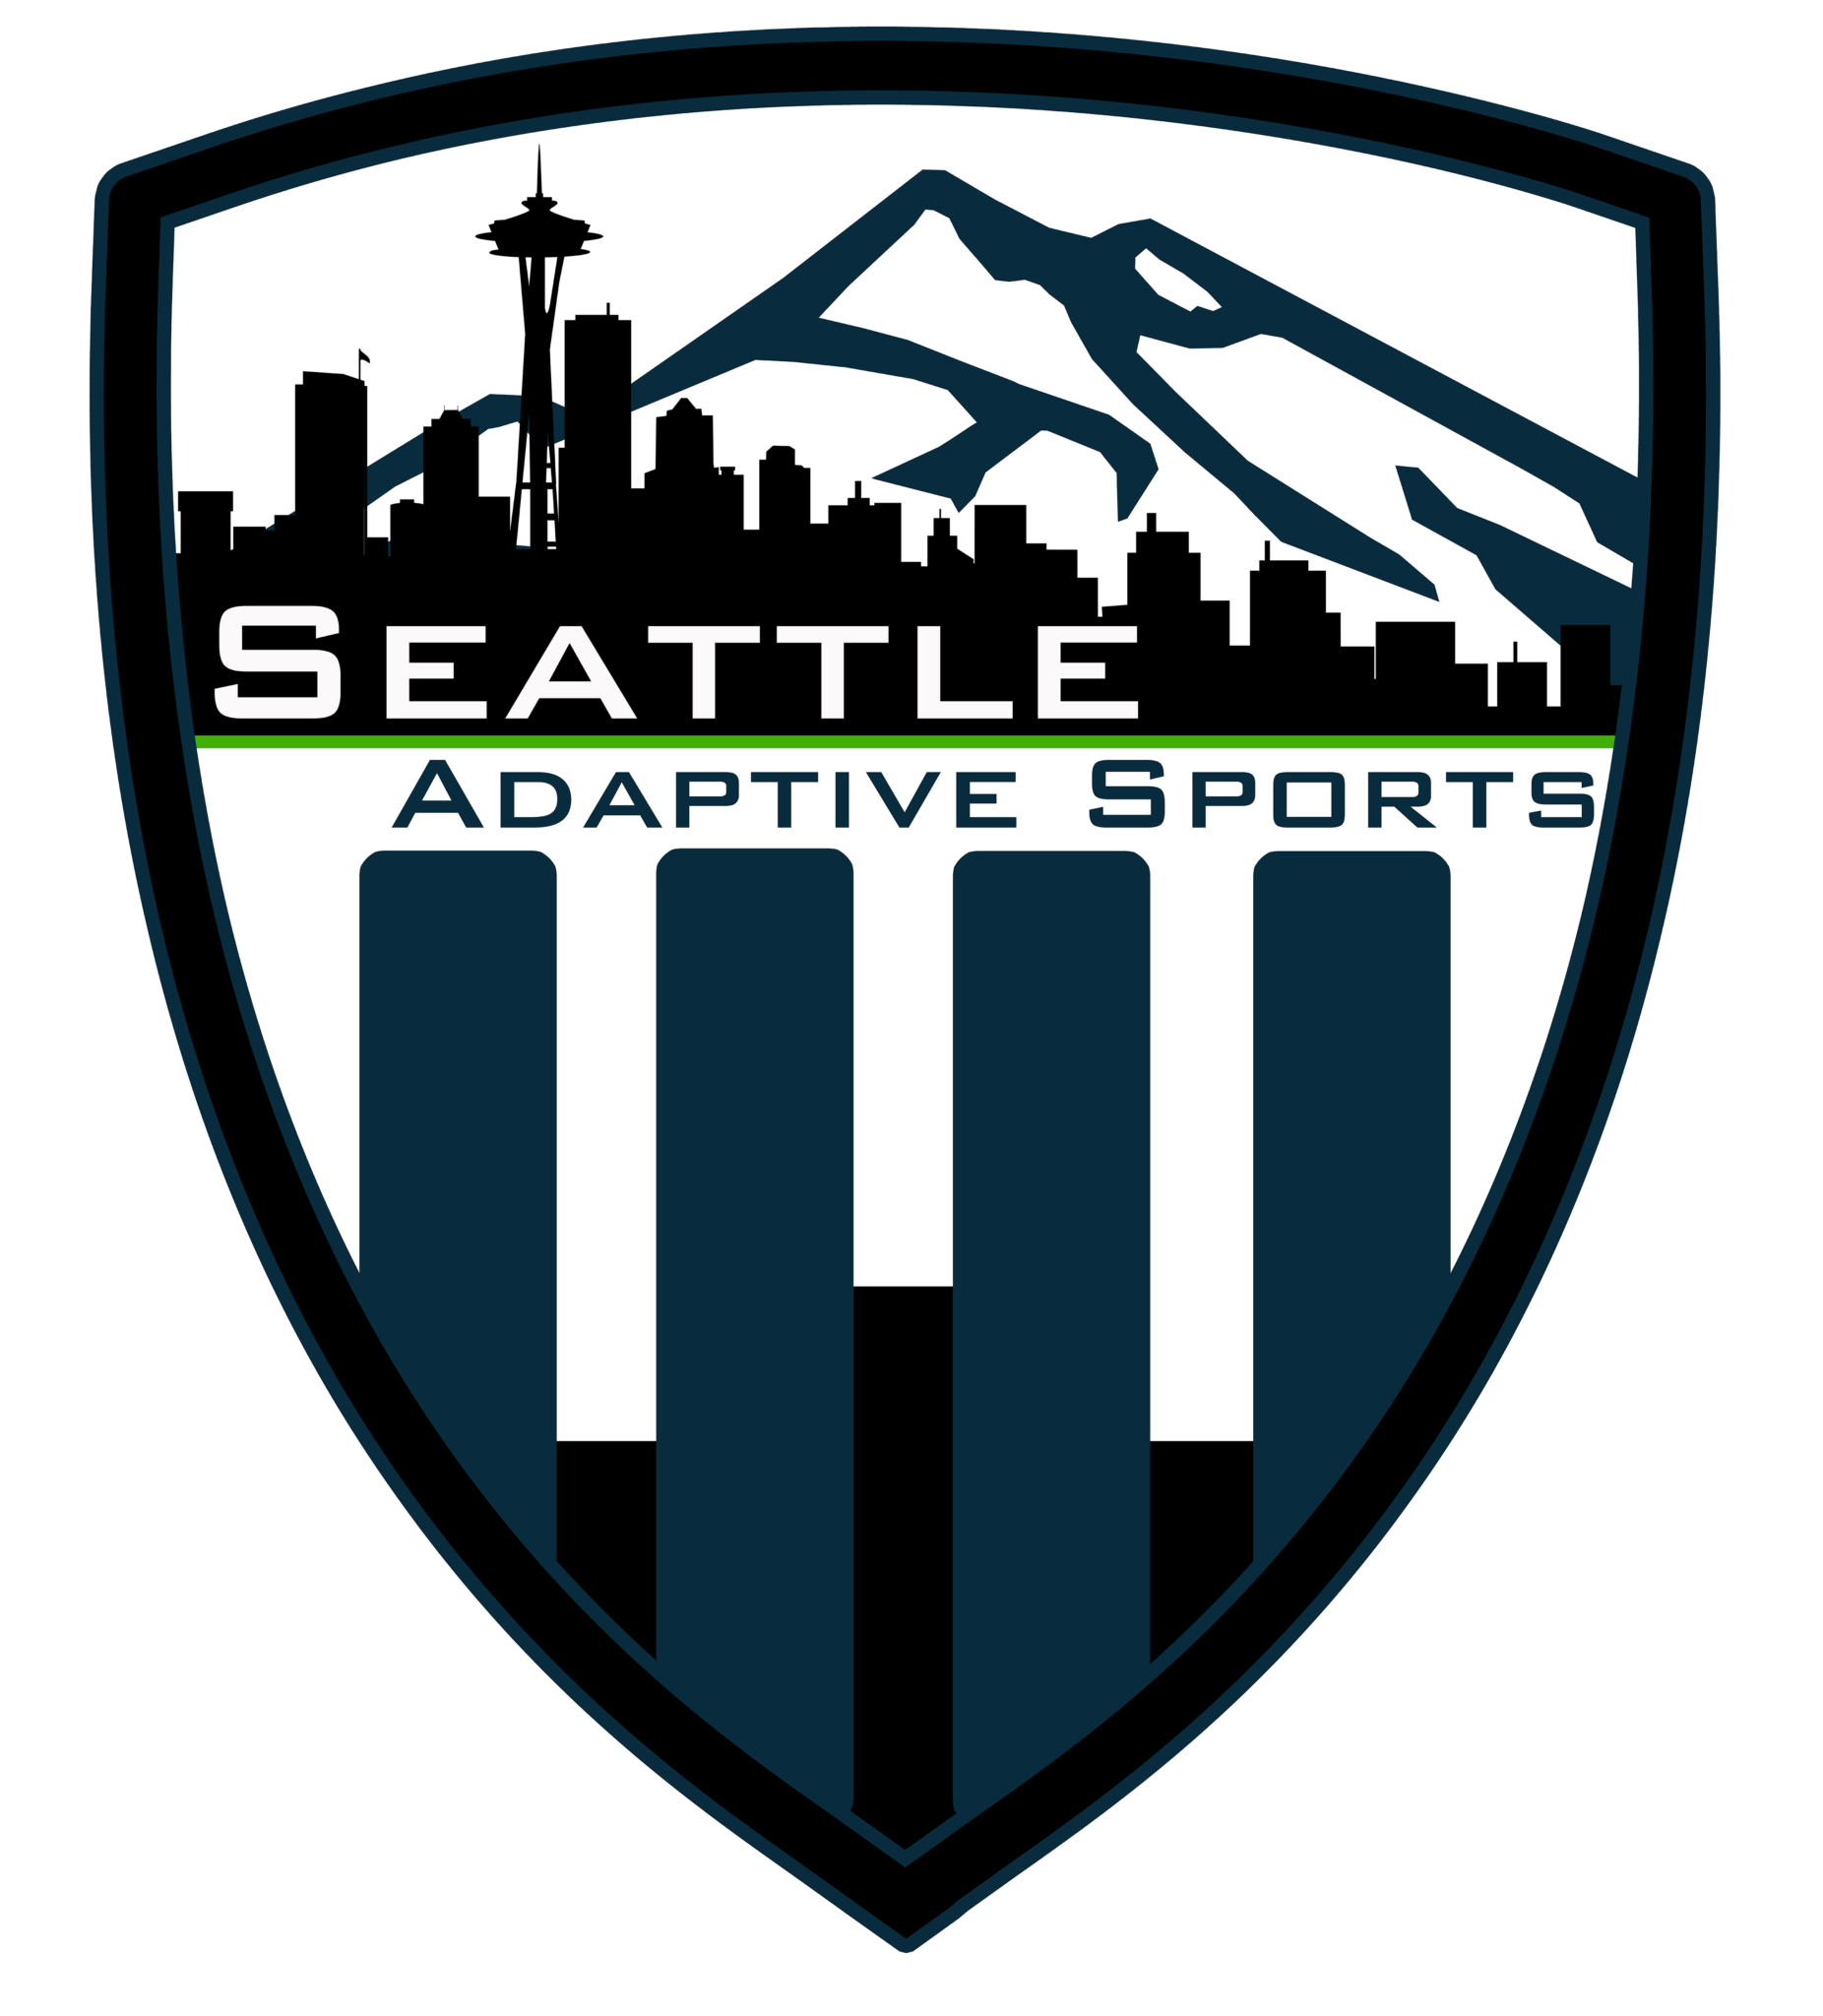 Seattle Adaptive Sports | Compete, Learn, Grow